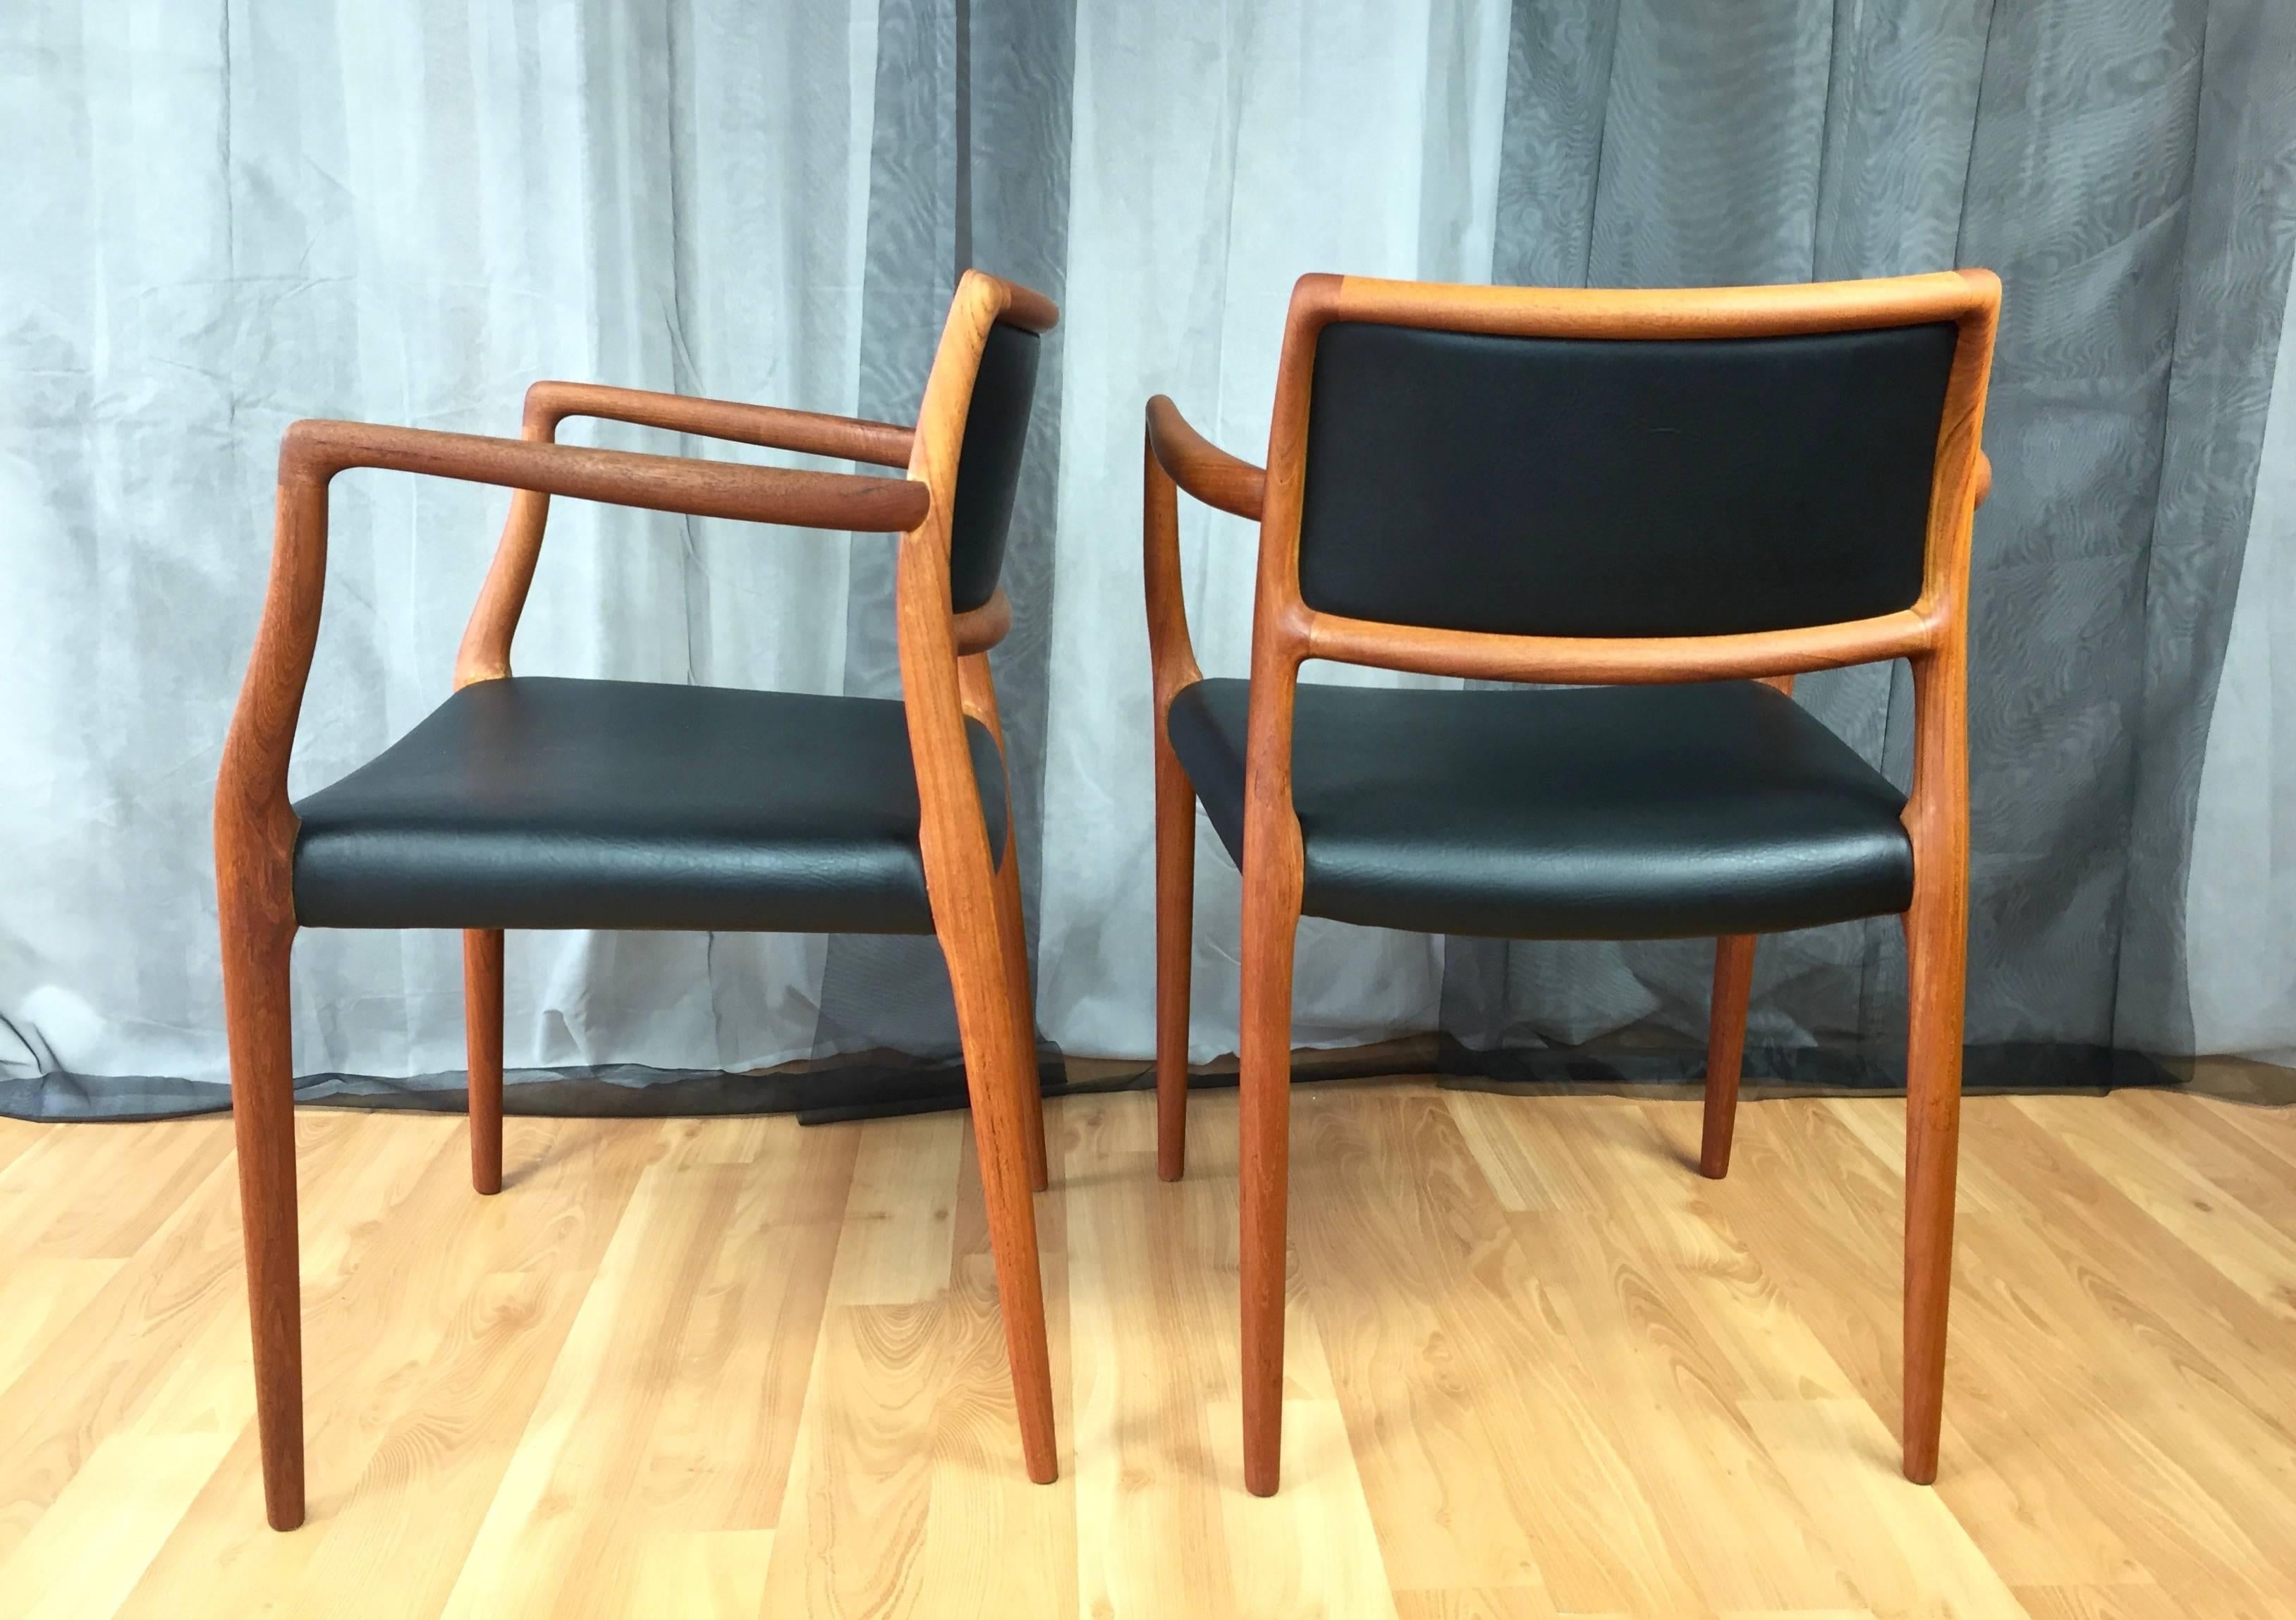 Scandinavian Modern Pair of Teak and Leather Model 65 Dining Chairs by Niels Møller